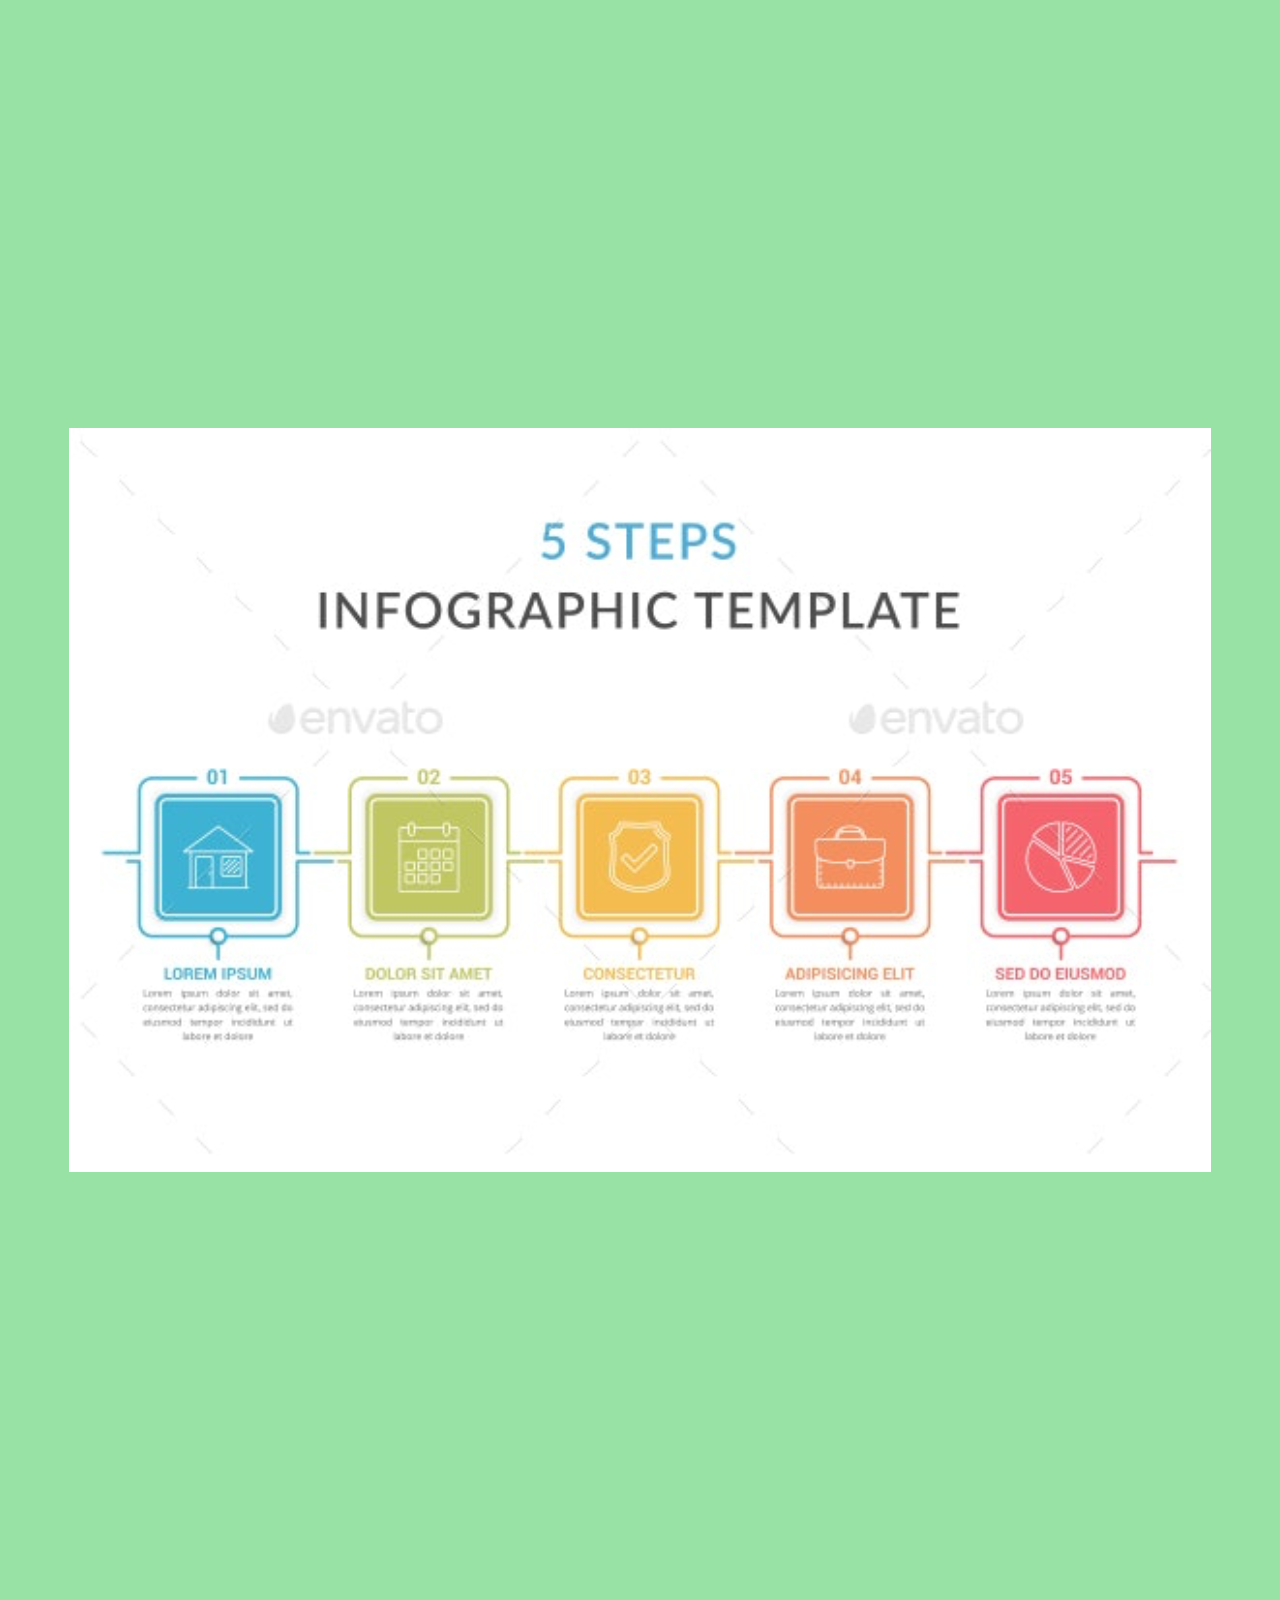 Five steps infographic template pinterest image.